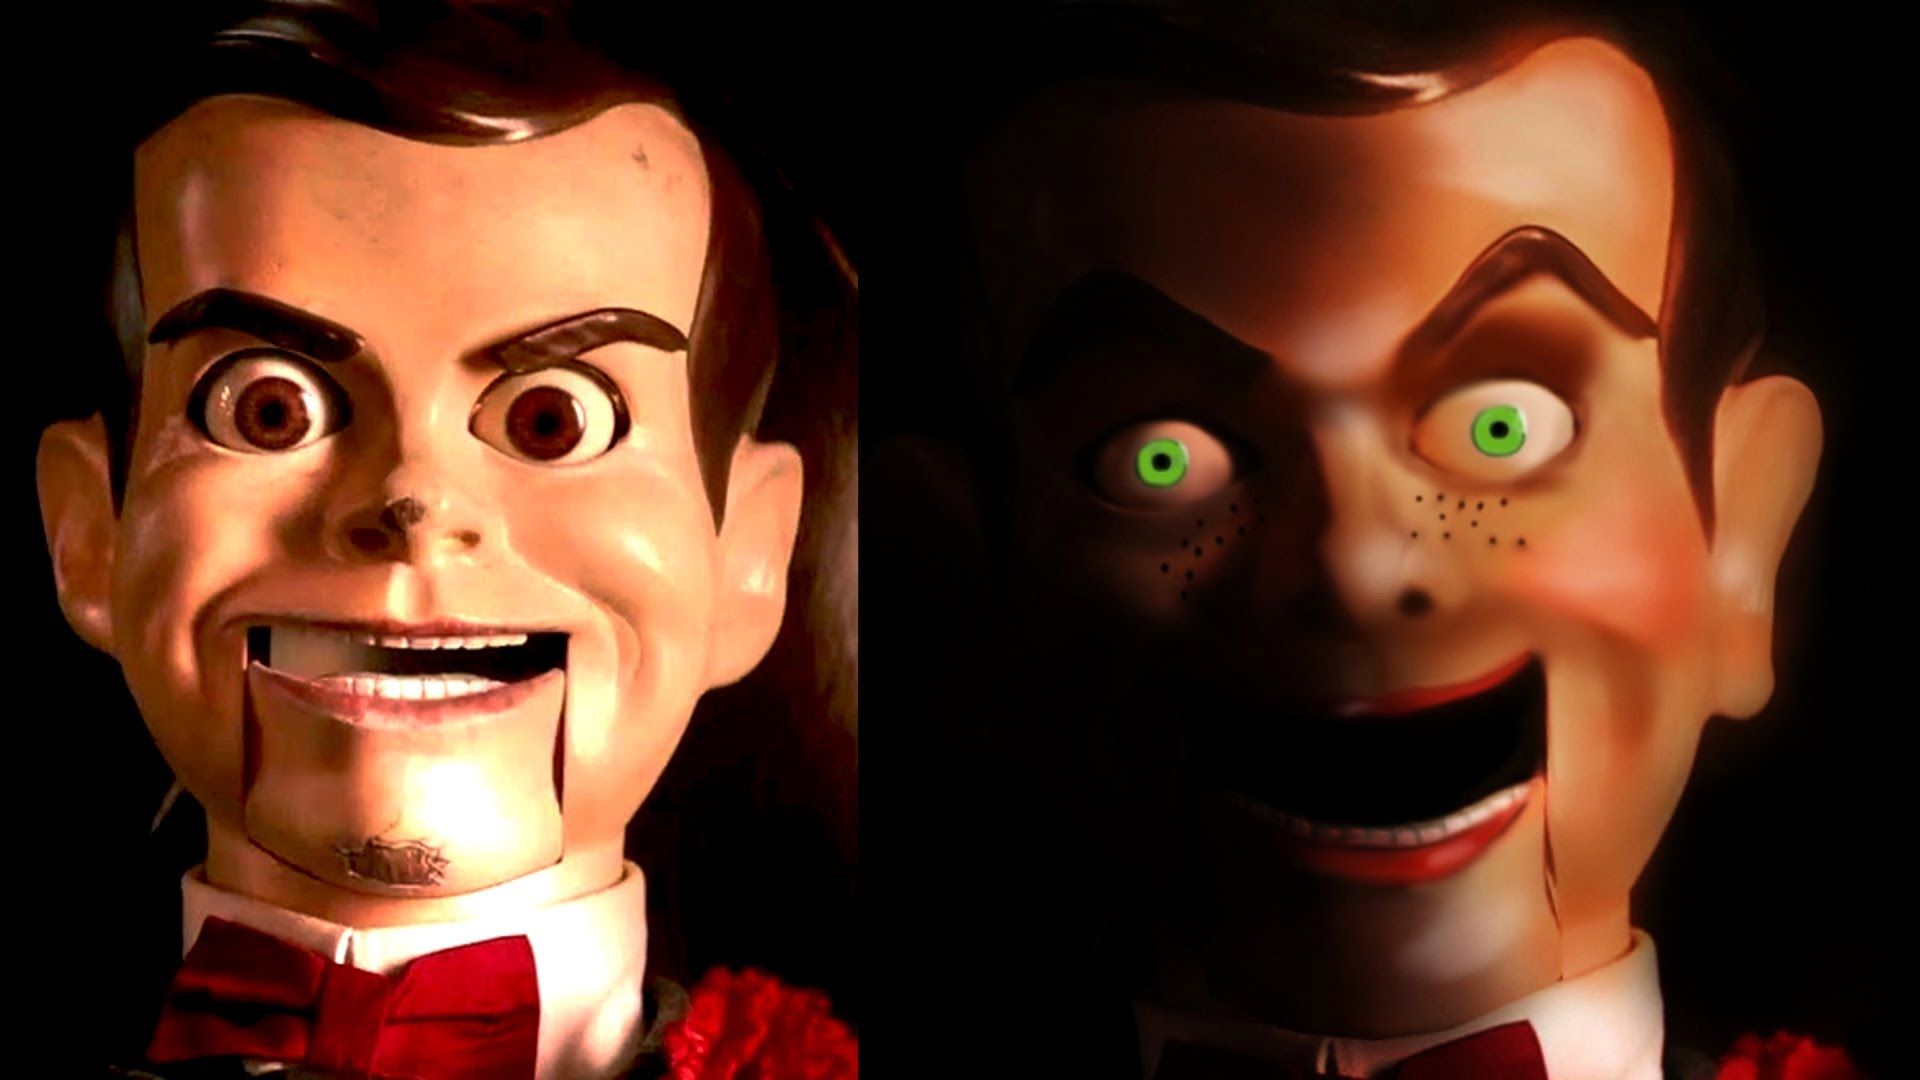 NEW Goosebumps Movie 2015 Slappy - What if he looked like the